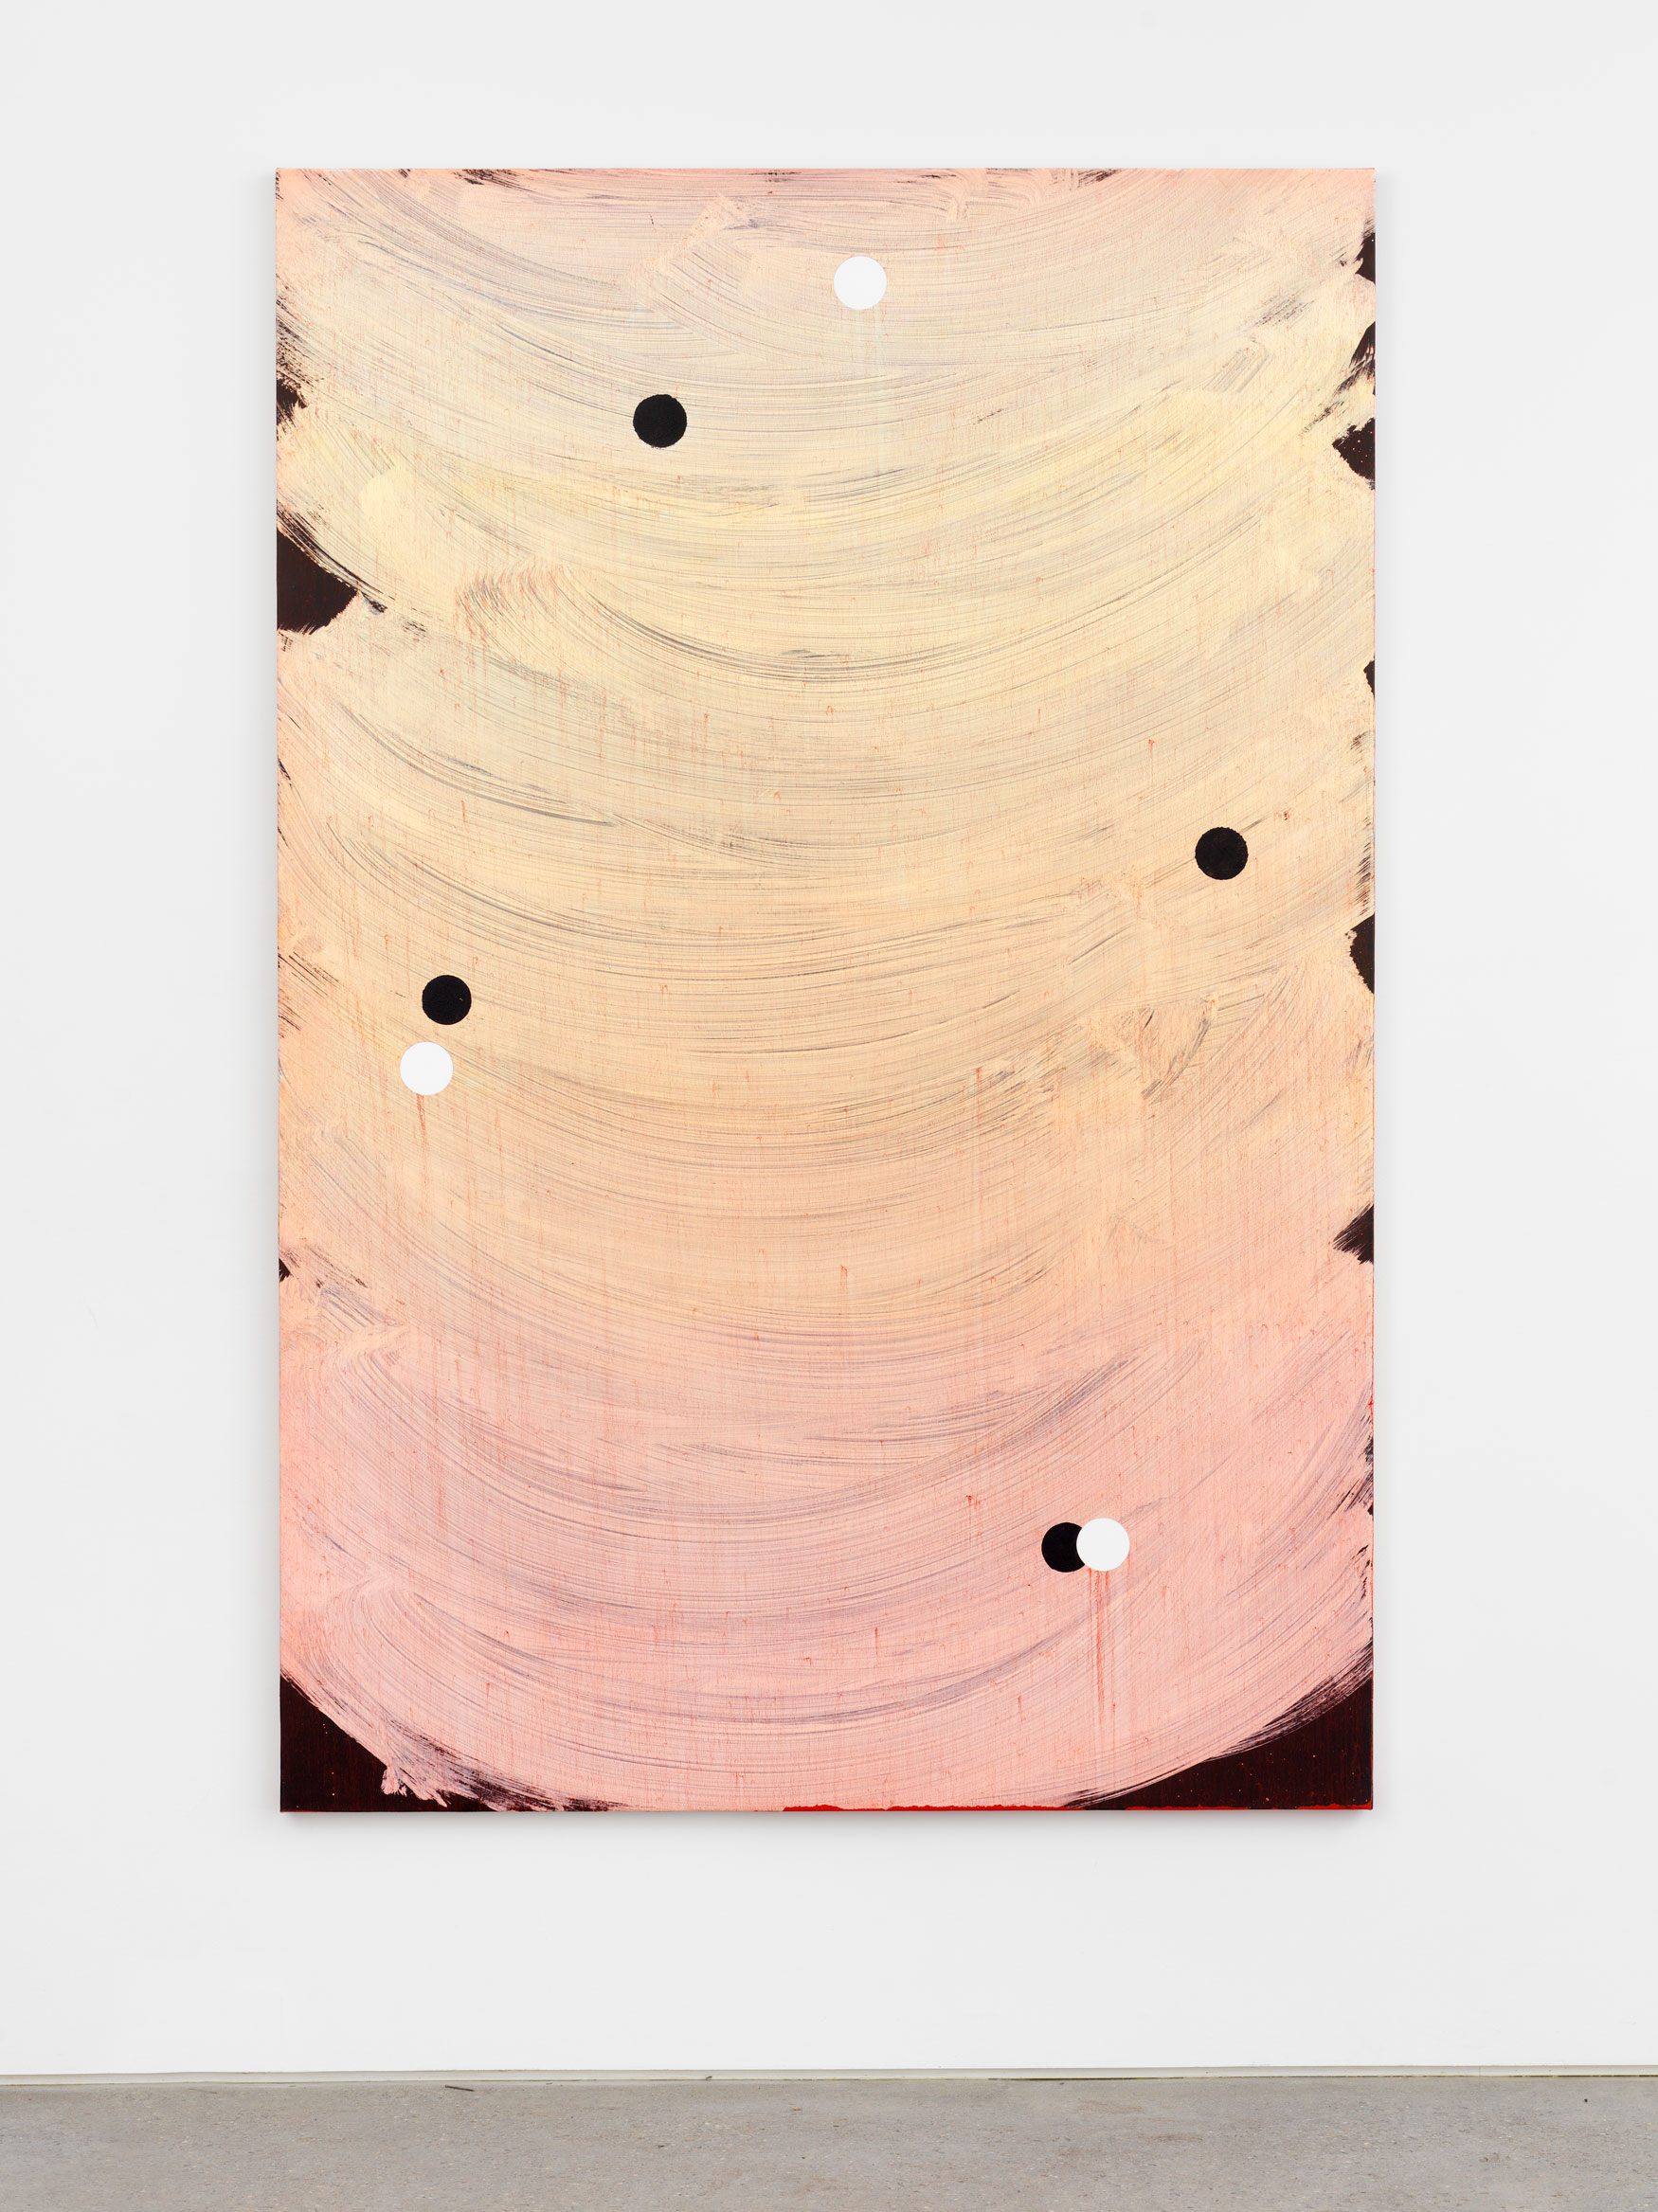 Alex Kwartler, Untitled (dawn), 2019, acrylic and oil on canvas, 72h x 48w in.